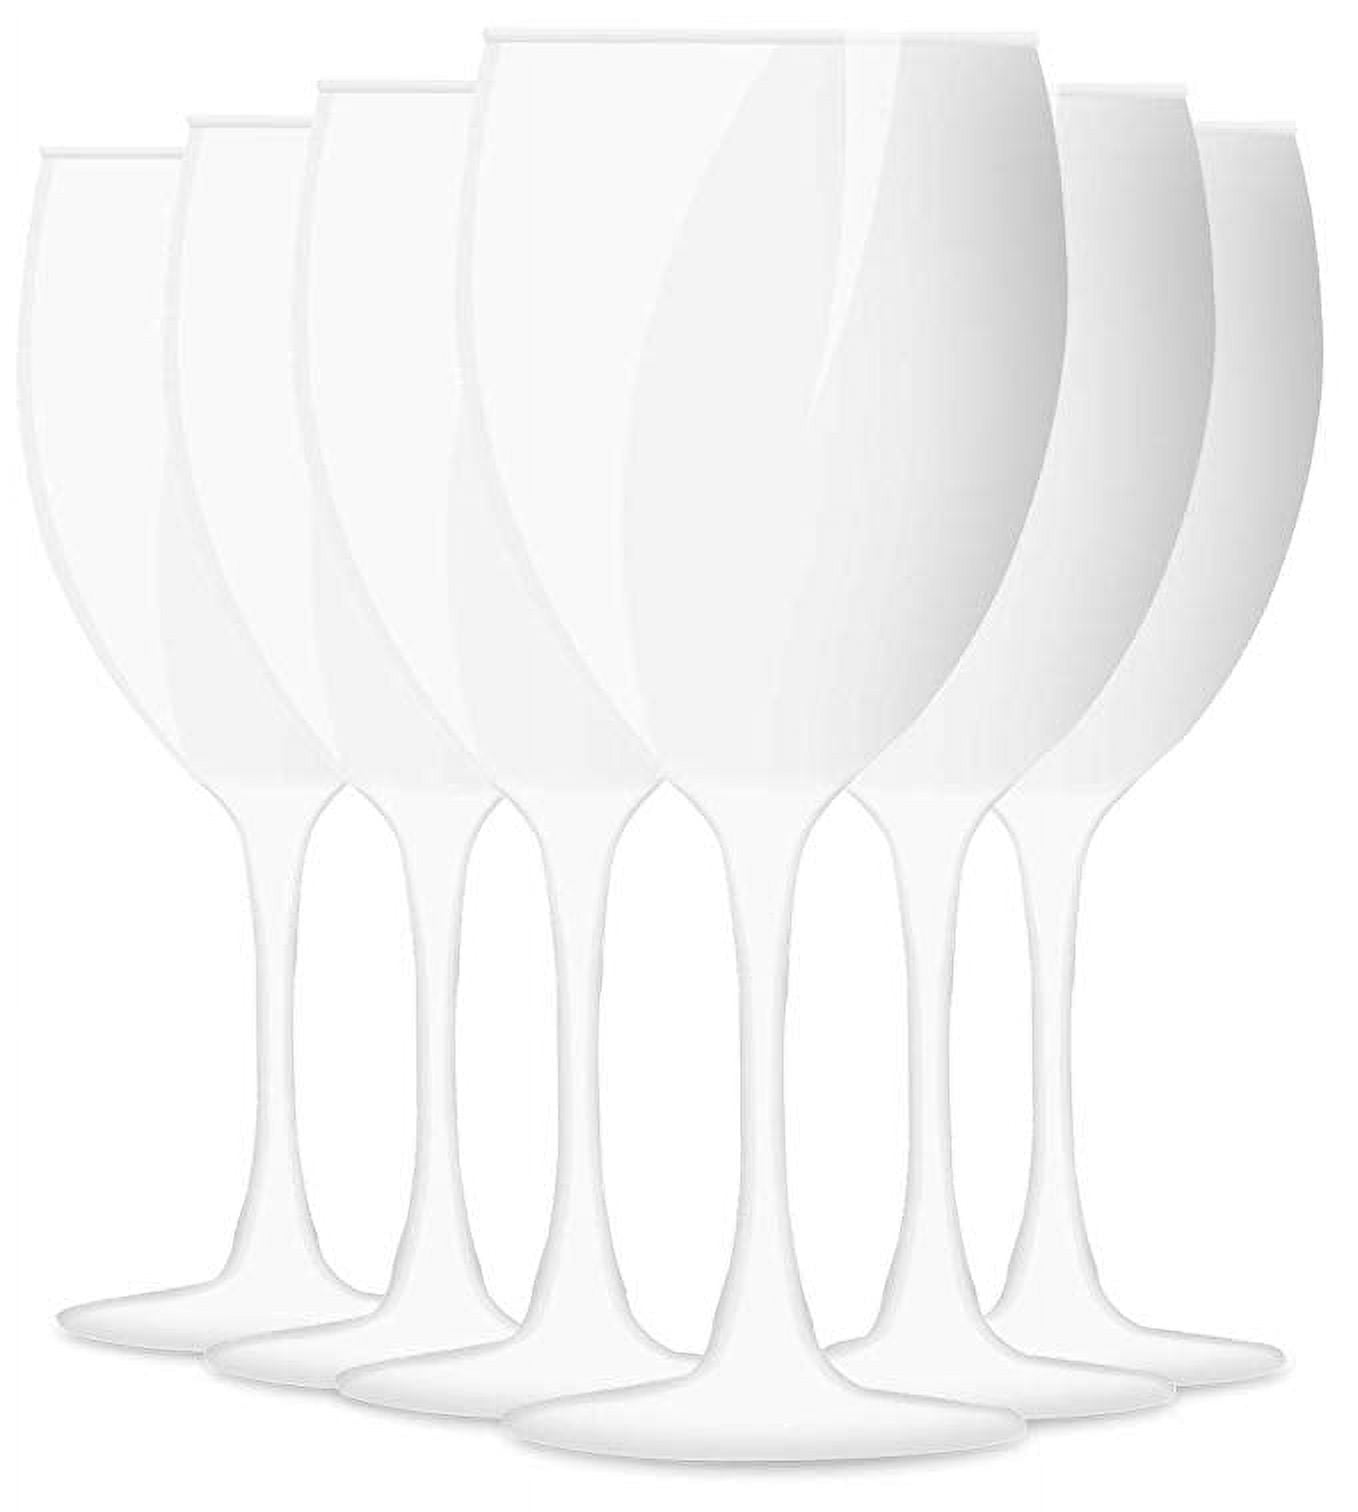 Tabletop King 10 oz Wine Glasses, Stemmed Style, Nuance Bottom Accent, Red, Set of 6, Size: One Size